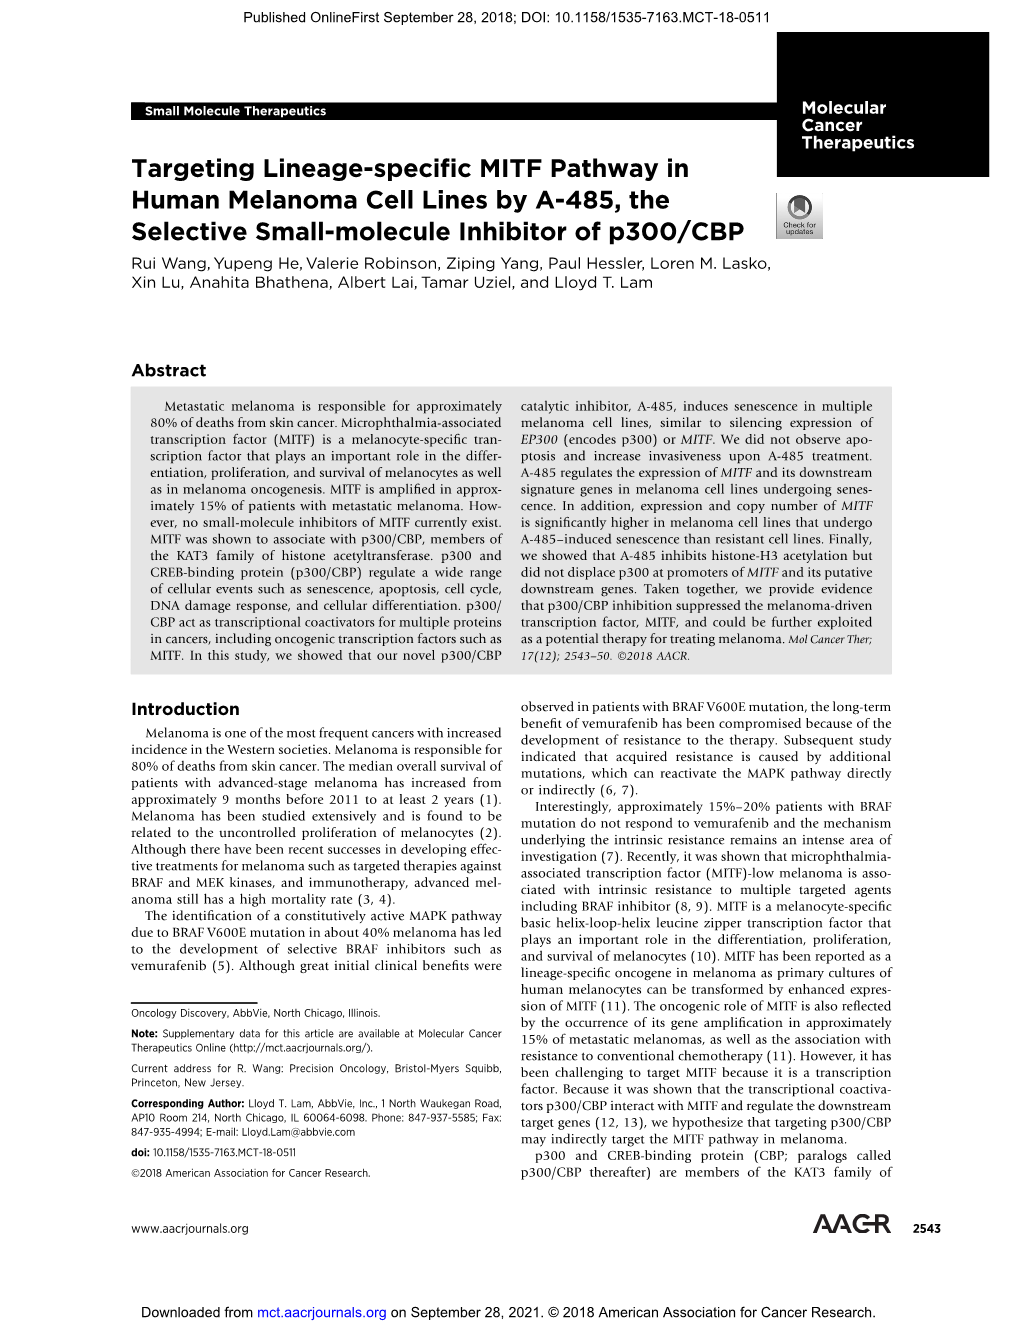 Targeting Lineage-Specific MITF Pathway in Human Melanoma Cell Lines by A-485, the Selective Small-Molecule Inhibitor of P300/CBP